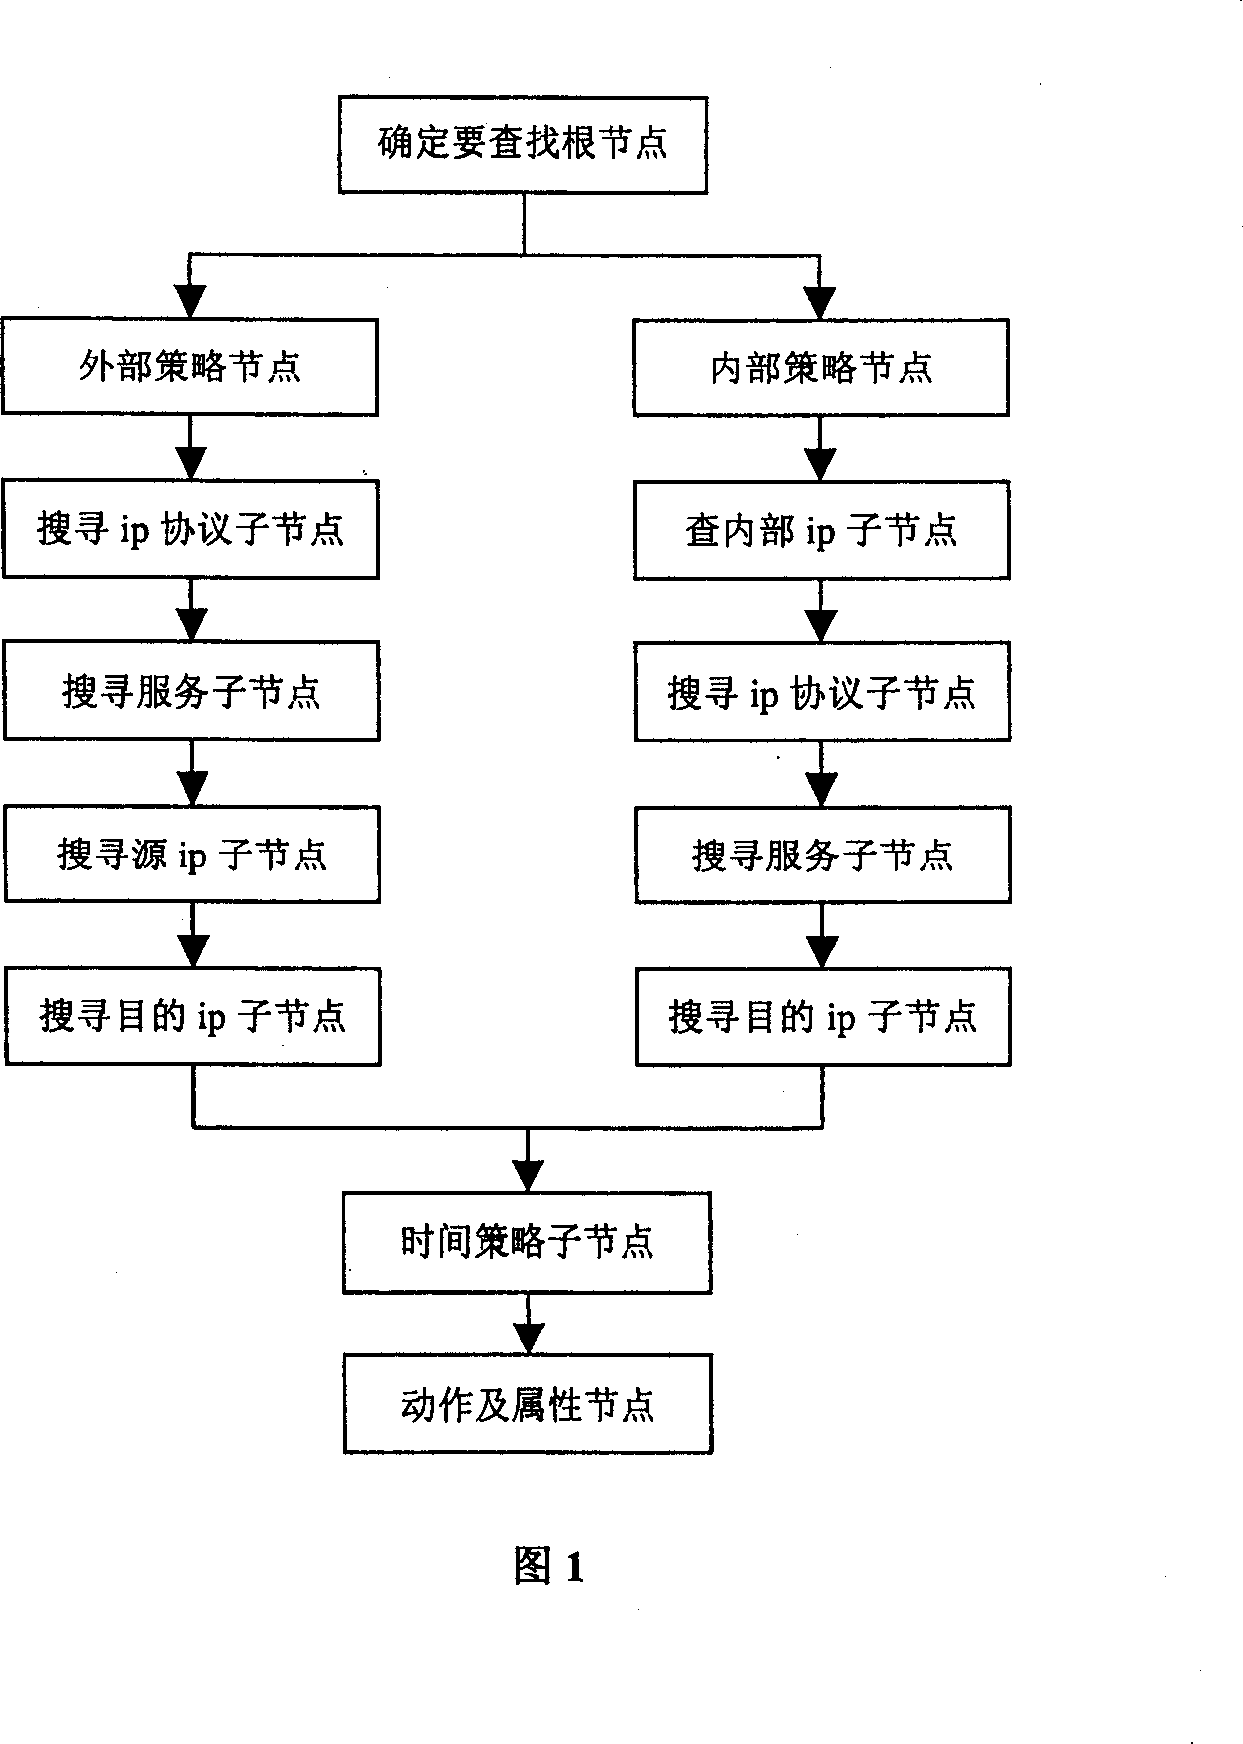 Policy tree based packet filtering and management method